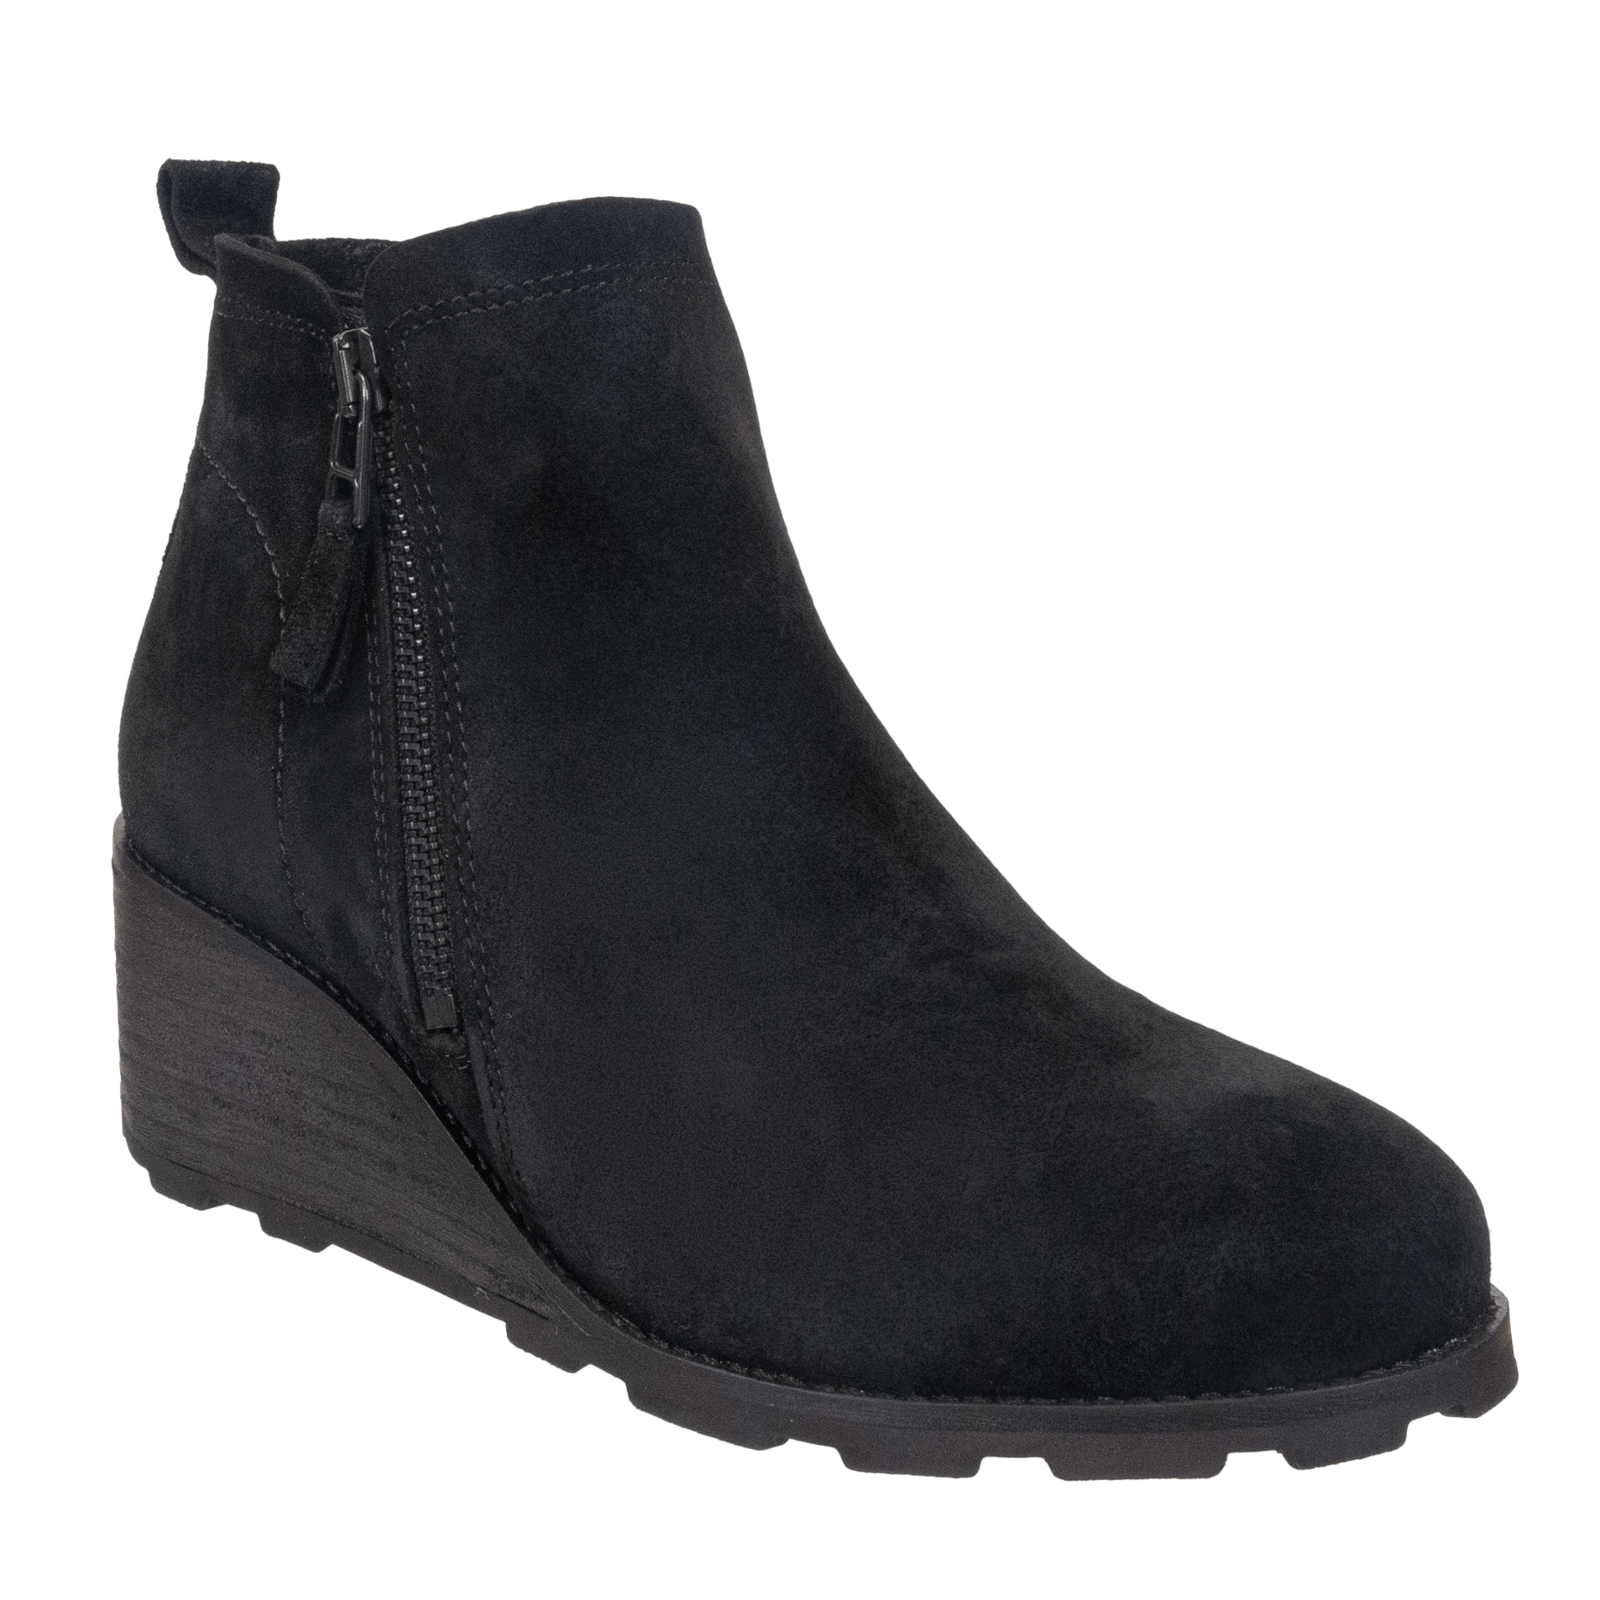 STORY in BLACK Wedge Ankle Boots